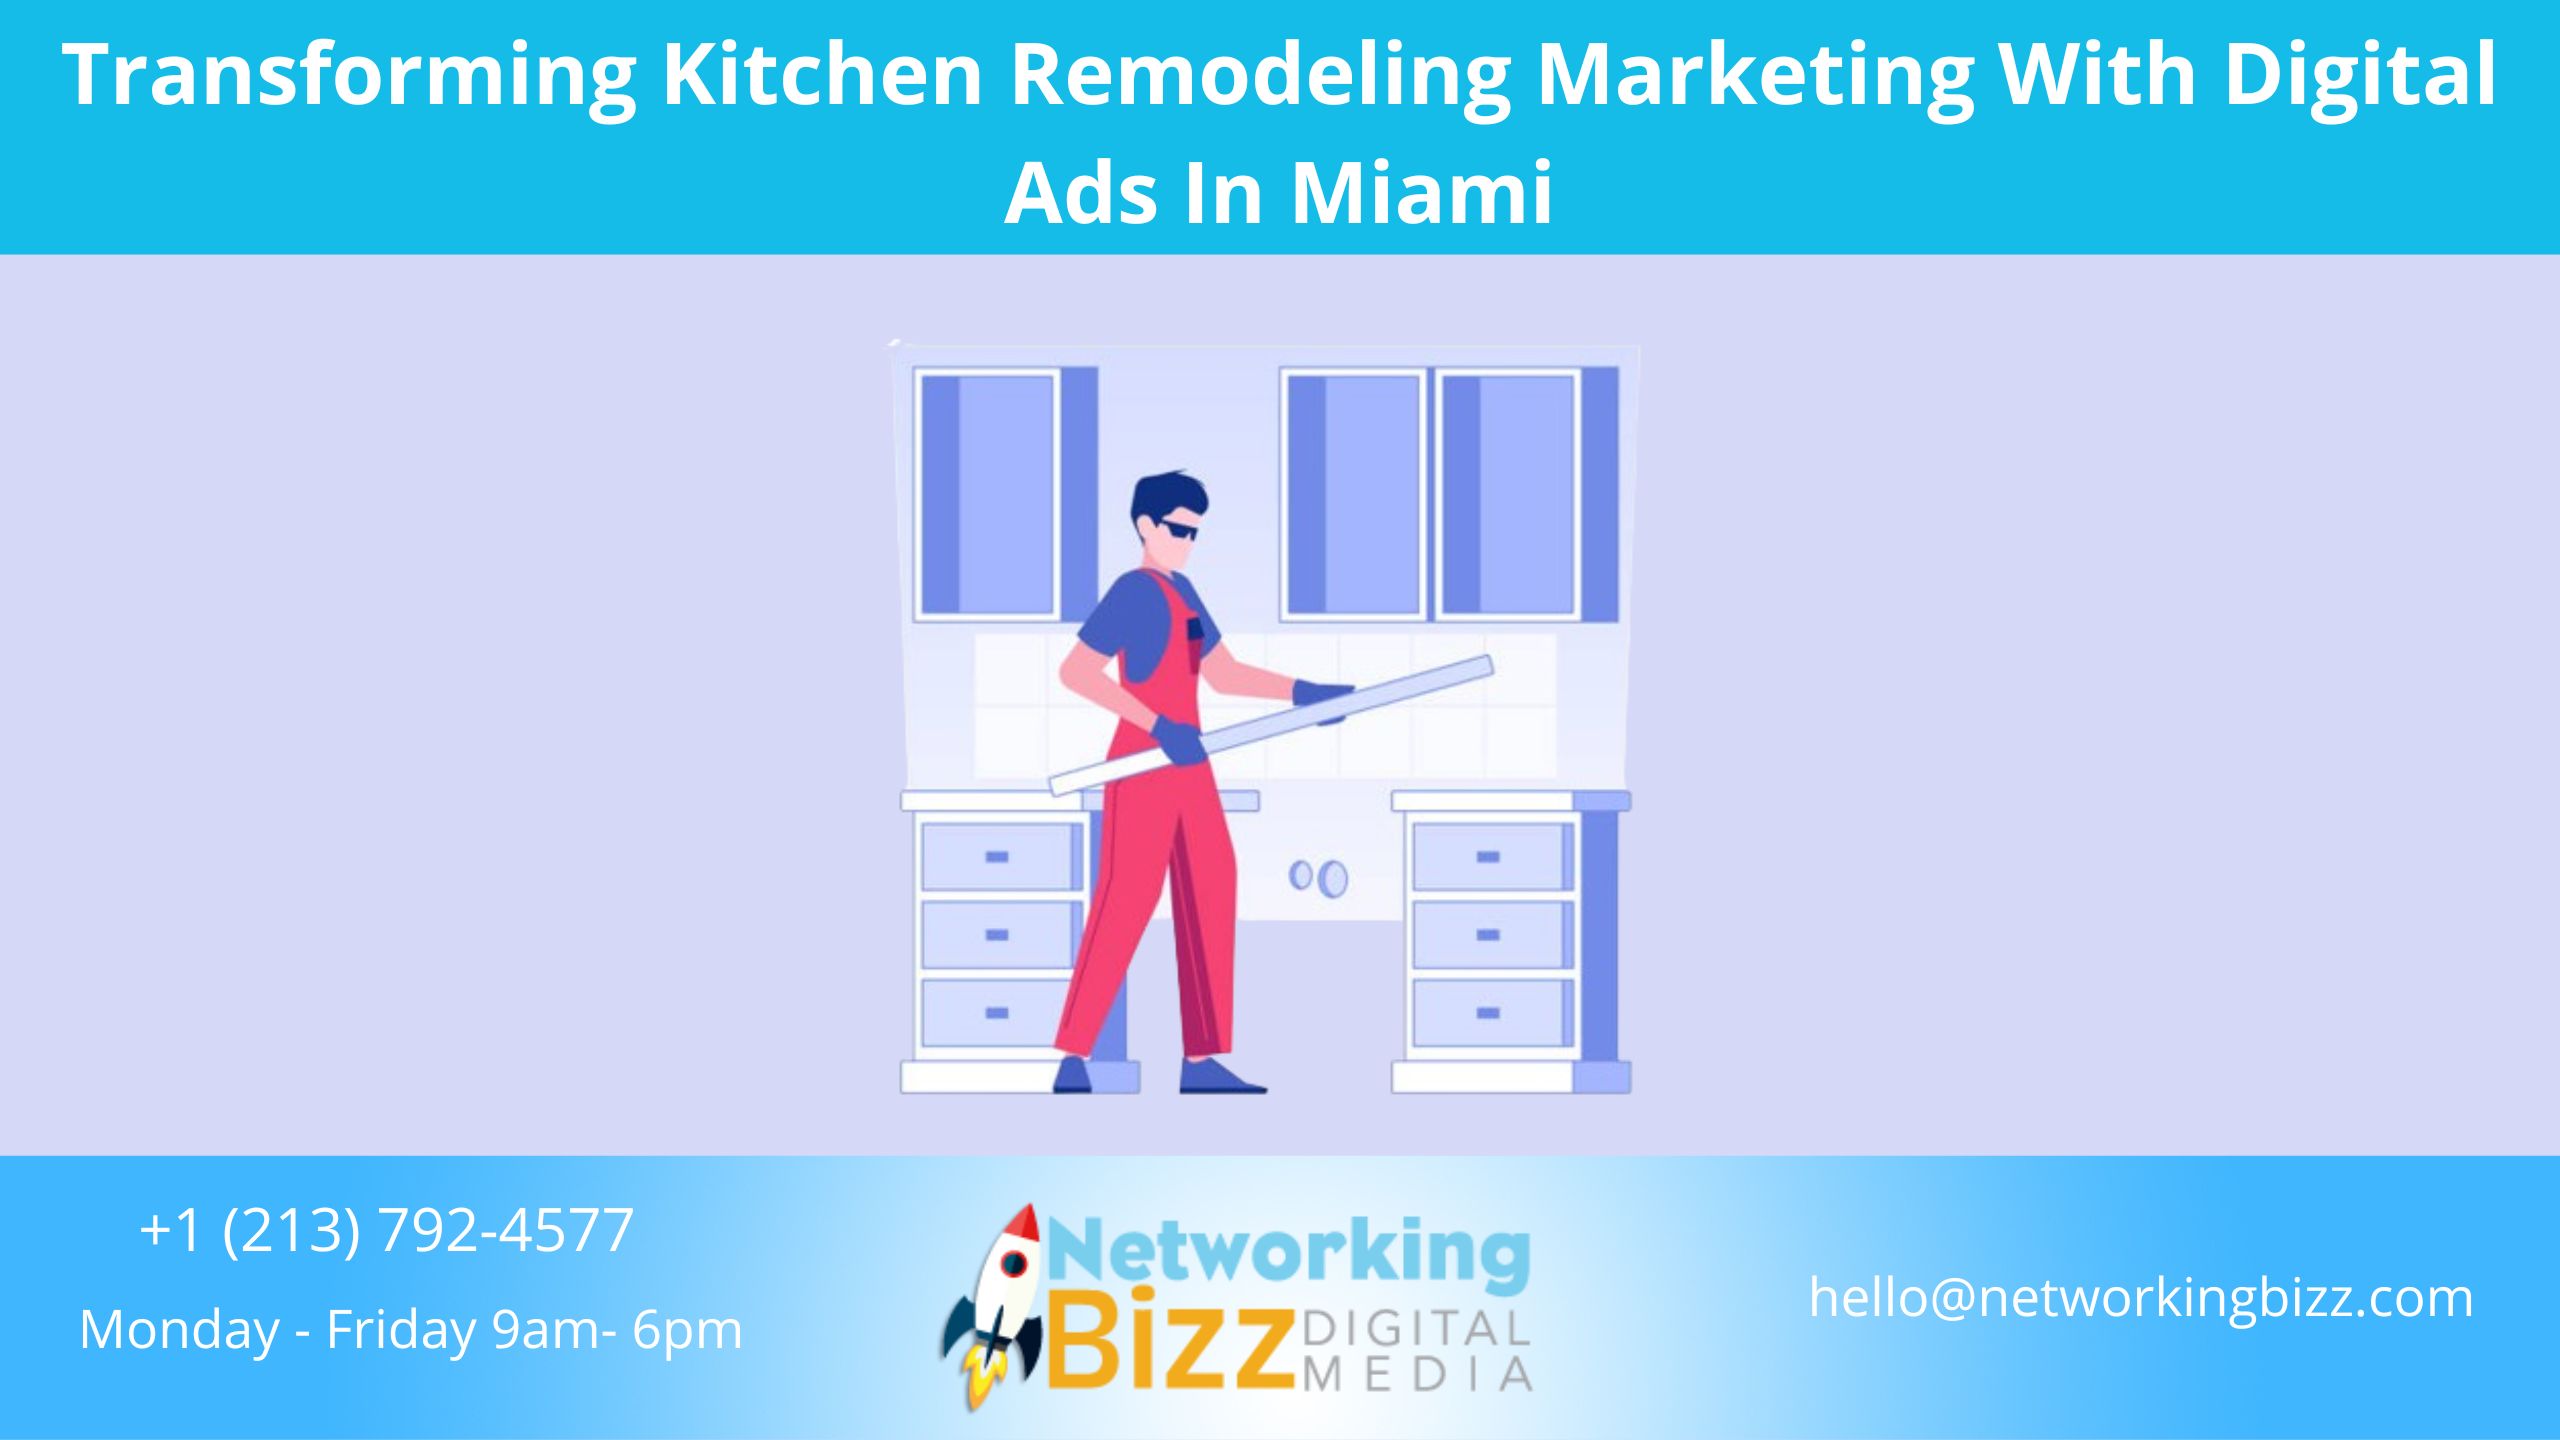 Transforming Kitchen Remodeling Marketing With Digital Ads In Miami